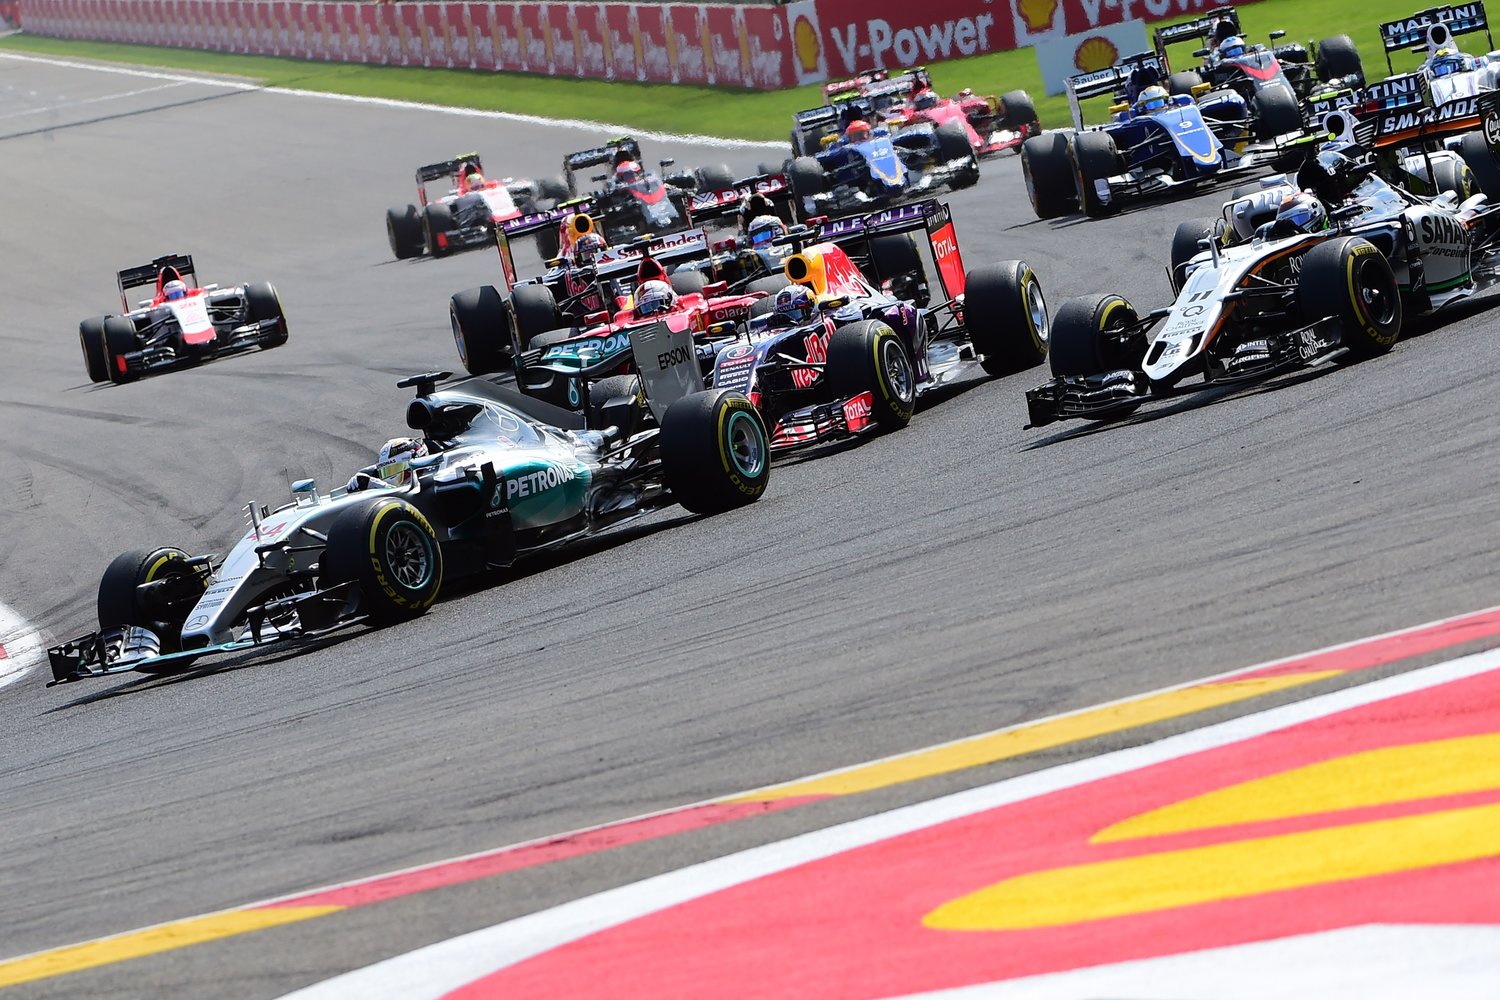 drivers-enter-the-first-turn-at-spa-during-the-2015-belgian-f1-grand-prix.jpg